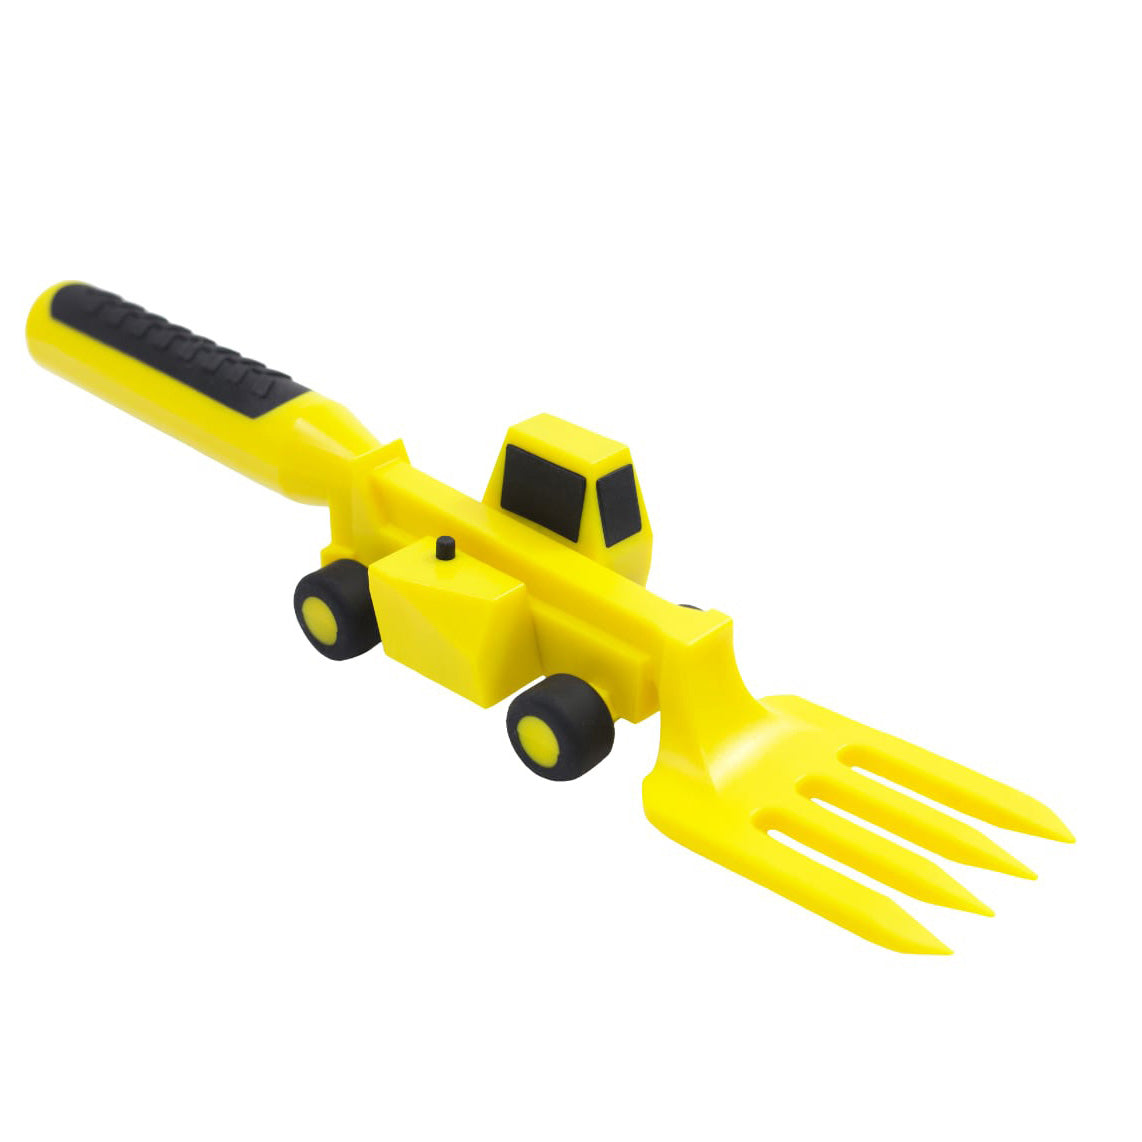 Constructive Eating Construction Utensils - Sold Individually